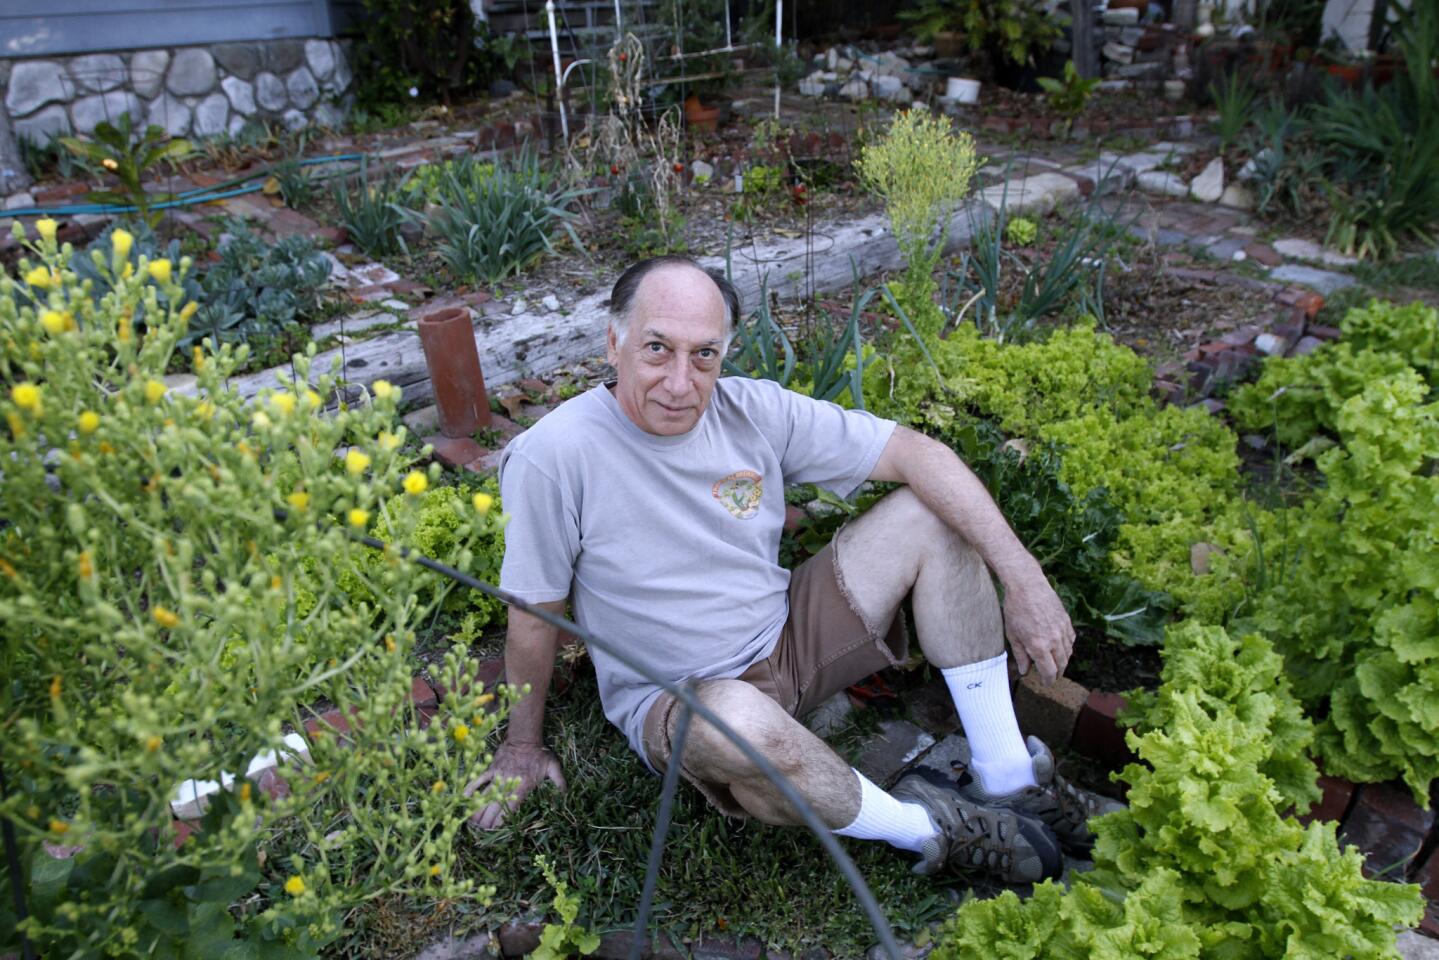 Jim Luna has had a garden in his front yard since he moved into his present home, some 40 years ago, in La Crescenta on Wednesday, March 12, 2014. Luna, who was a ballet dancer and computer tech, lets some of his fruits and vegetables go seed and then spreads that seed around his garden for the next year's crop.